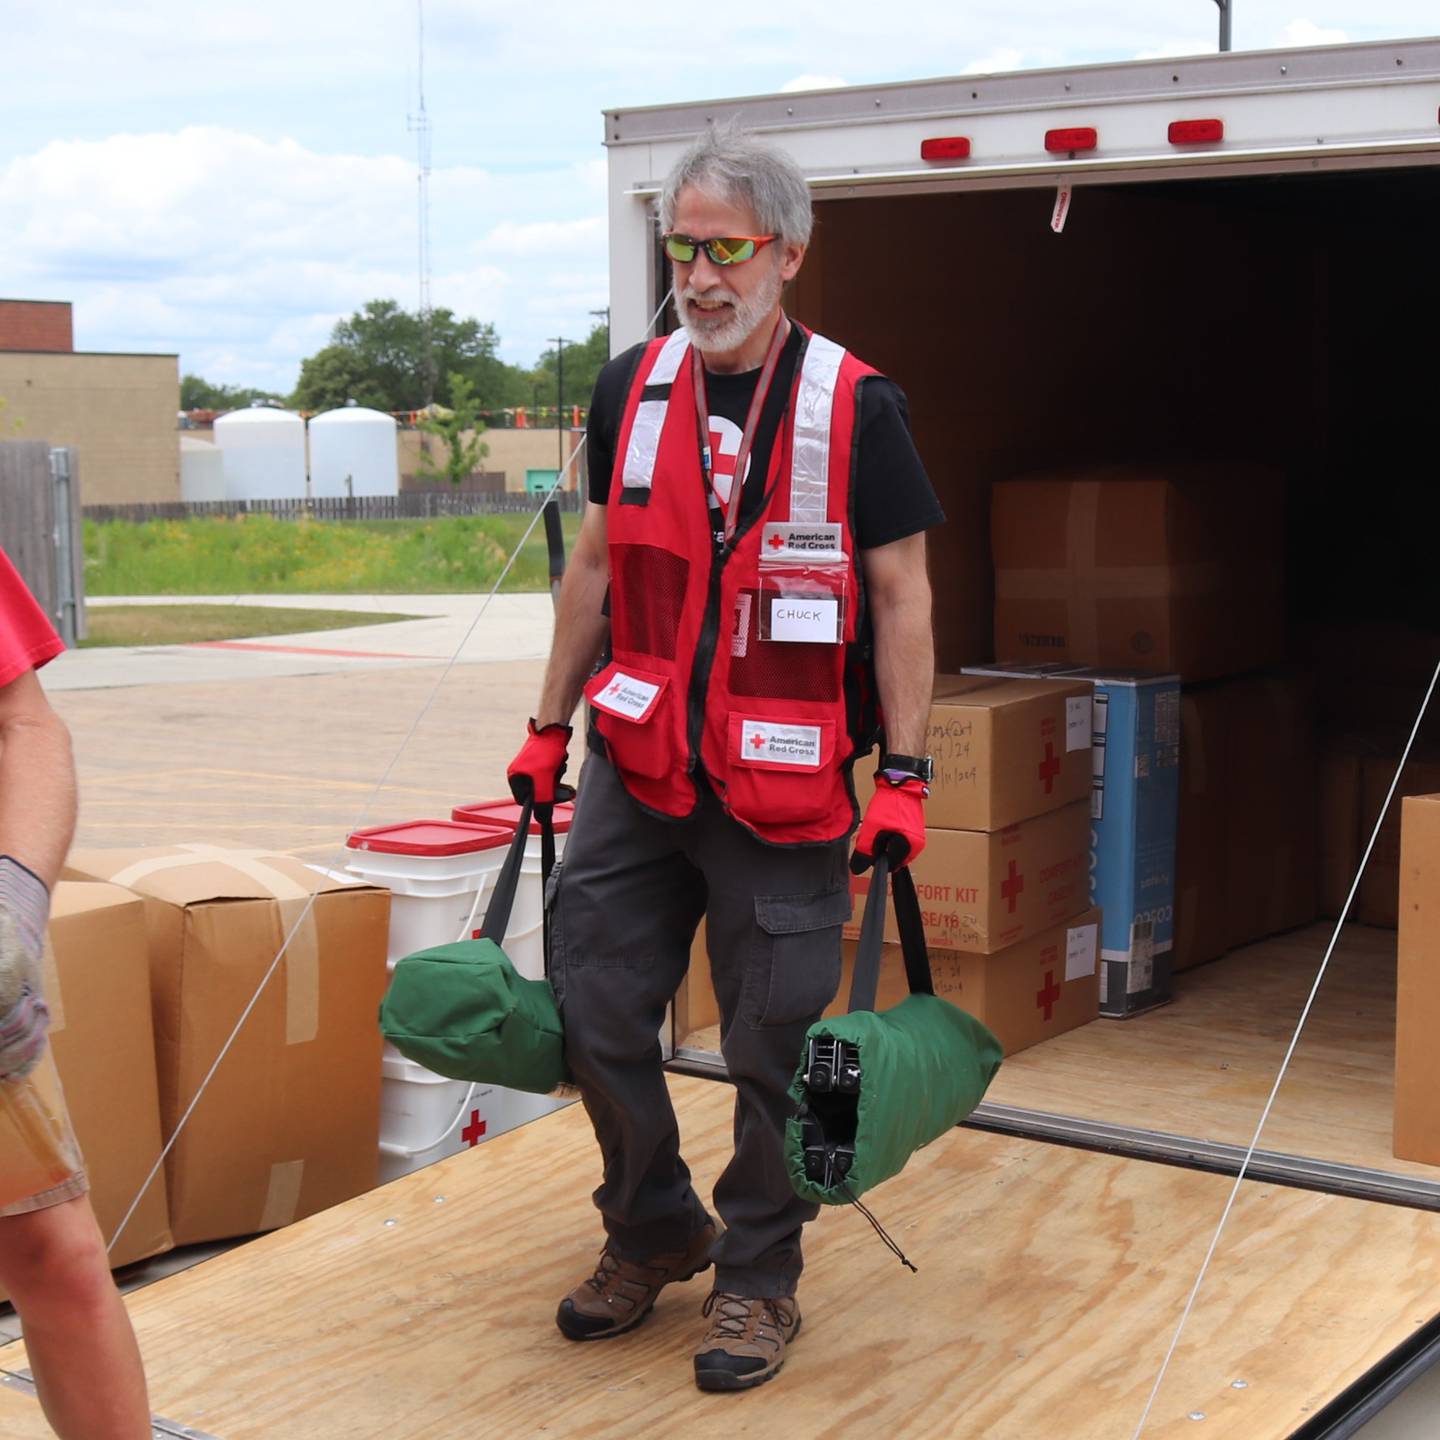 Chuck Massaro of Wheaton began volunteering with the Red Cross in 2020. Massaro helped set up a shelter for those affected by the tornado in Woodridge and Naperville in 2021. Massaro also volunteers with the Red Cross. Red. "Sound the alarm,” installing smoke alarms on weekends when he’s not helping the Red Cross Disaster Action Team.